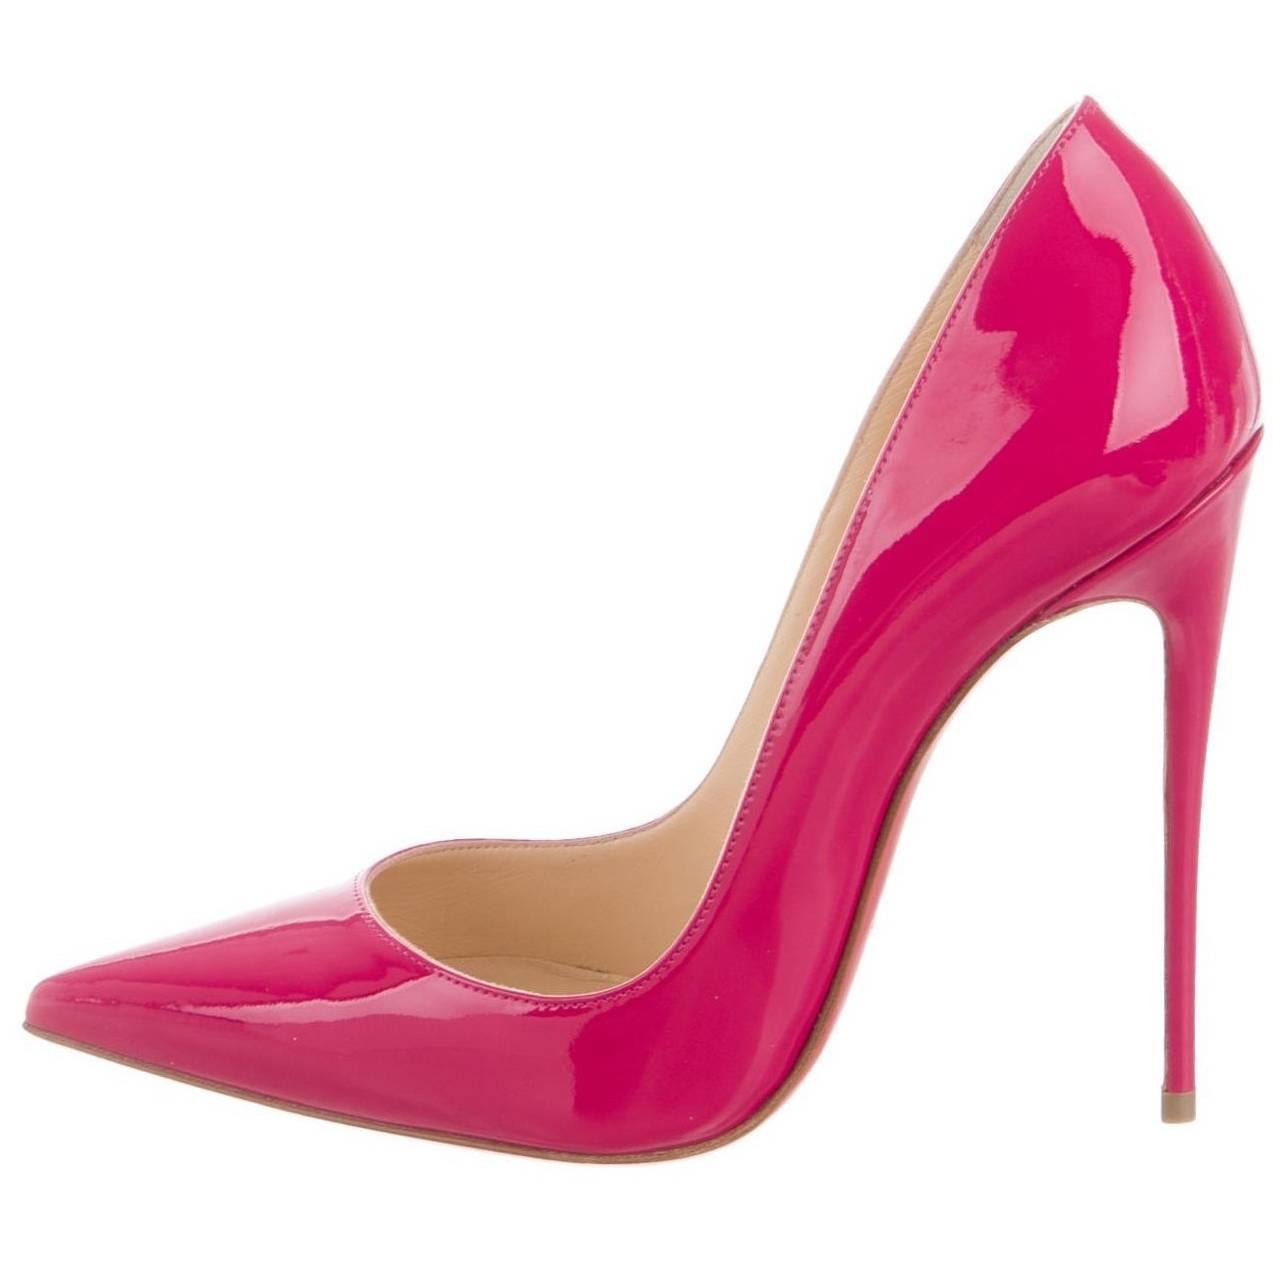 Christian Louboutin New Fuchsia Patent Leather So Kate High Heels Pumps 